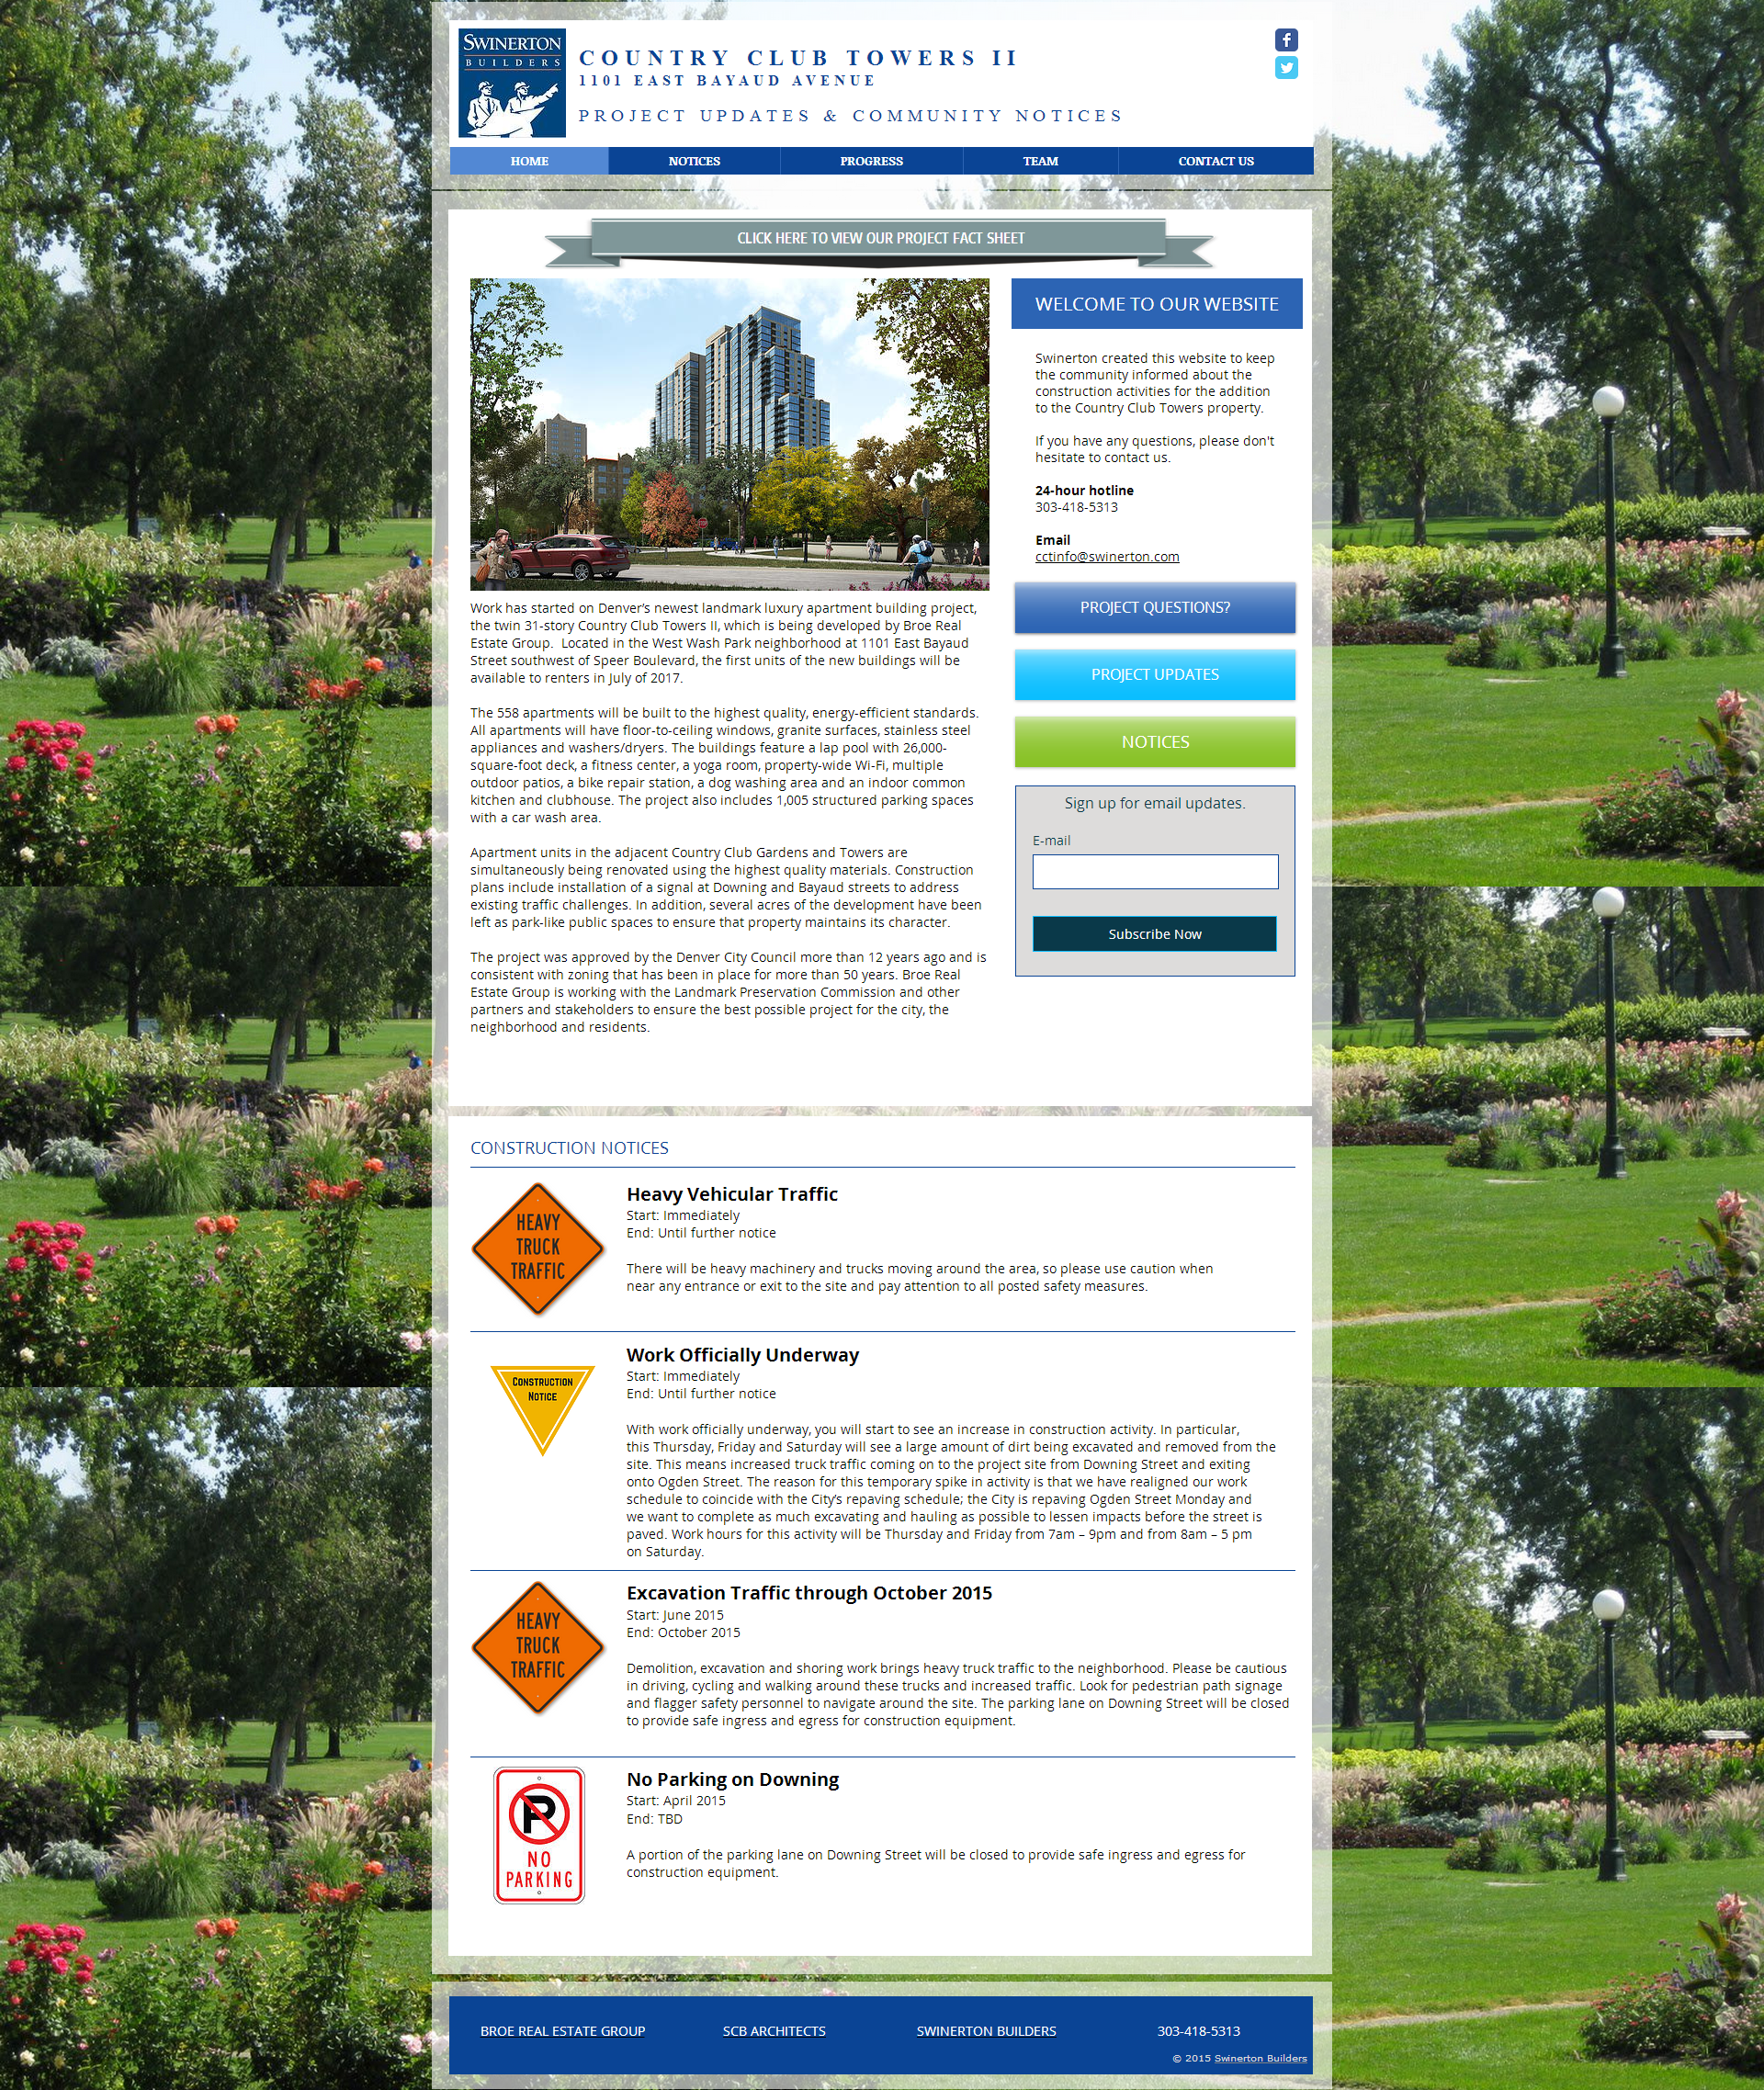  Swinerton Builders of Colorado needed a project website 1101 East Bayaud to help convey the developer's messages to the neighbors and other stakeholders. &nbsp;Red Thread created the website and mobile platform, along with securing the "real estate"